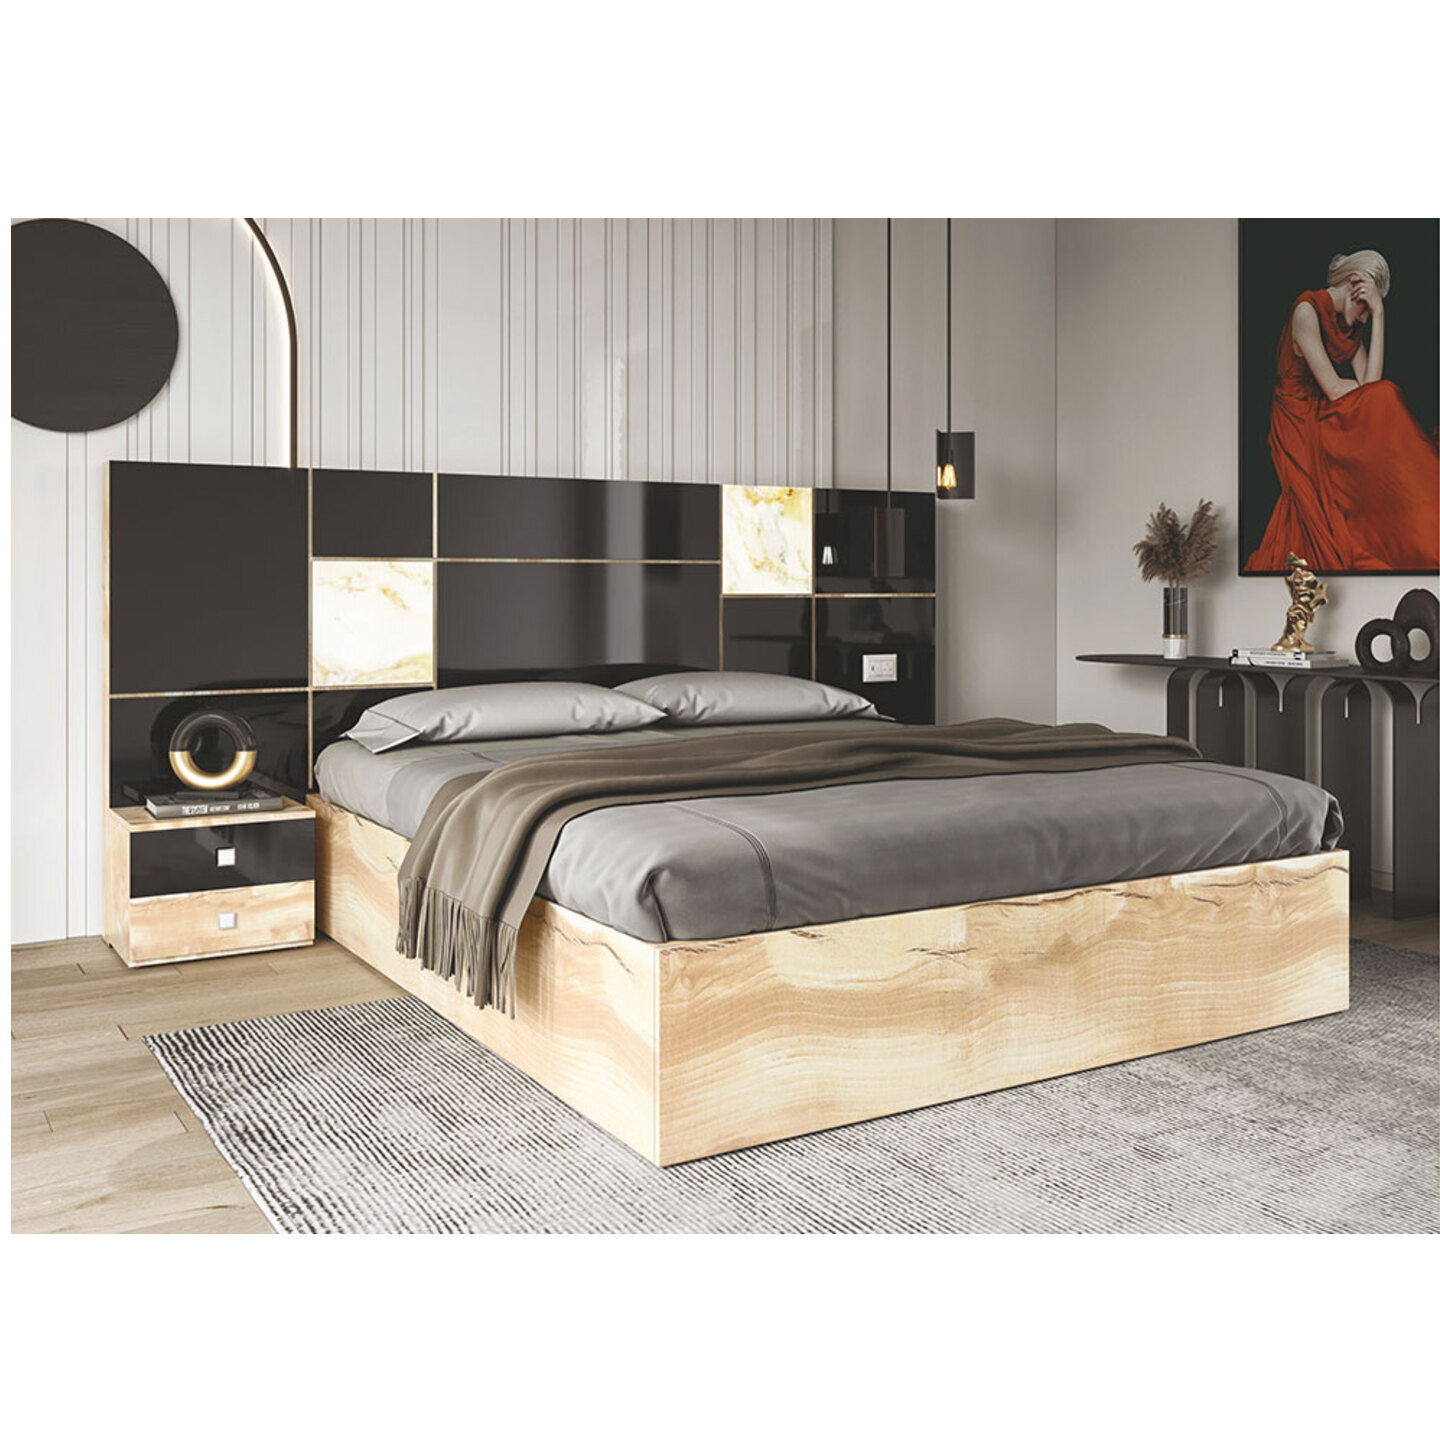 RLF King Size Bed 78"x72" Aspre Bed With Side Box In Brown Colour